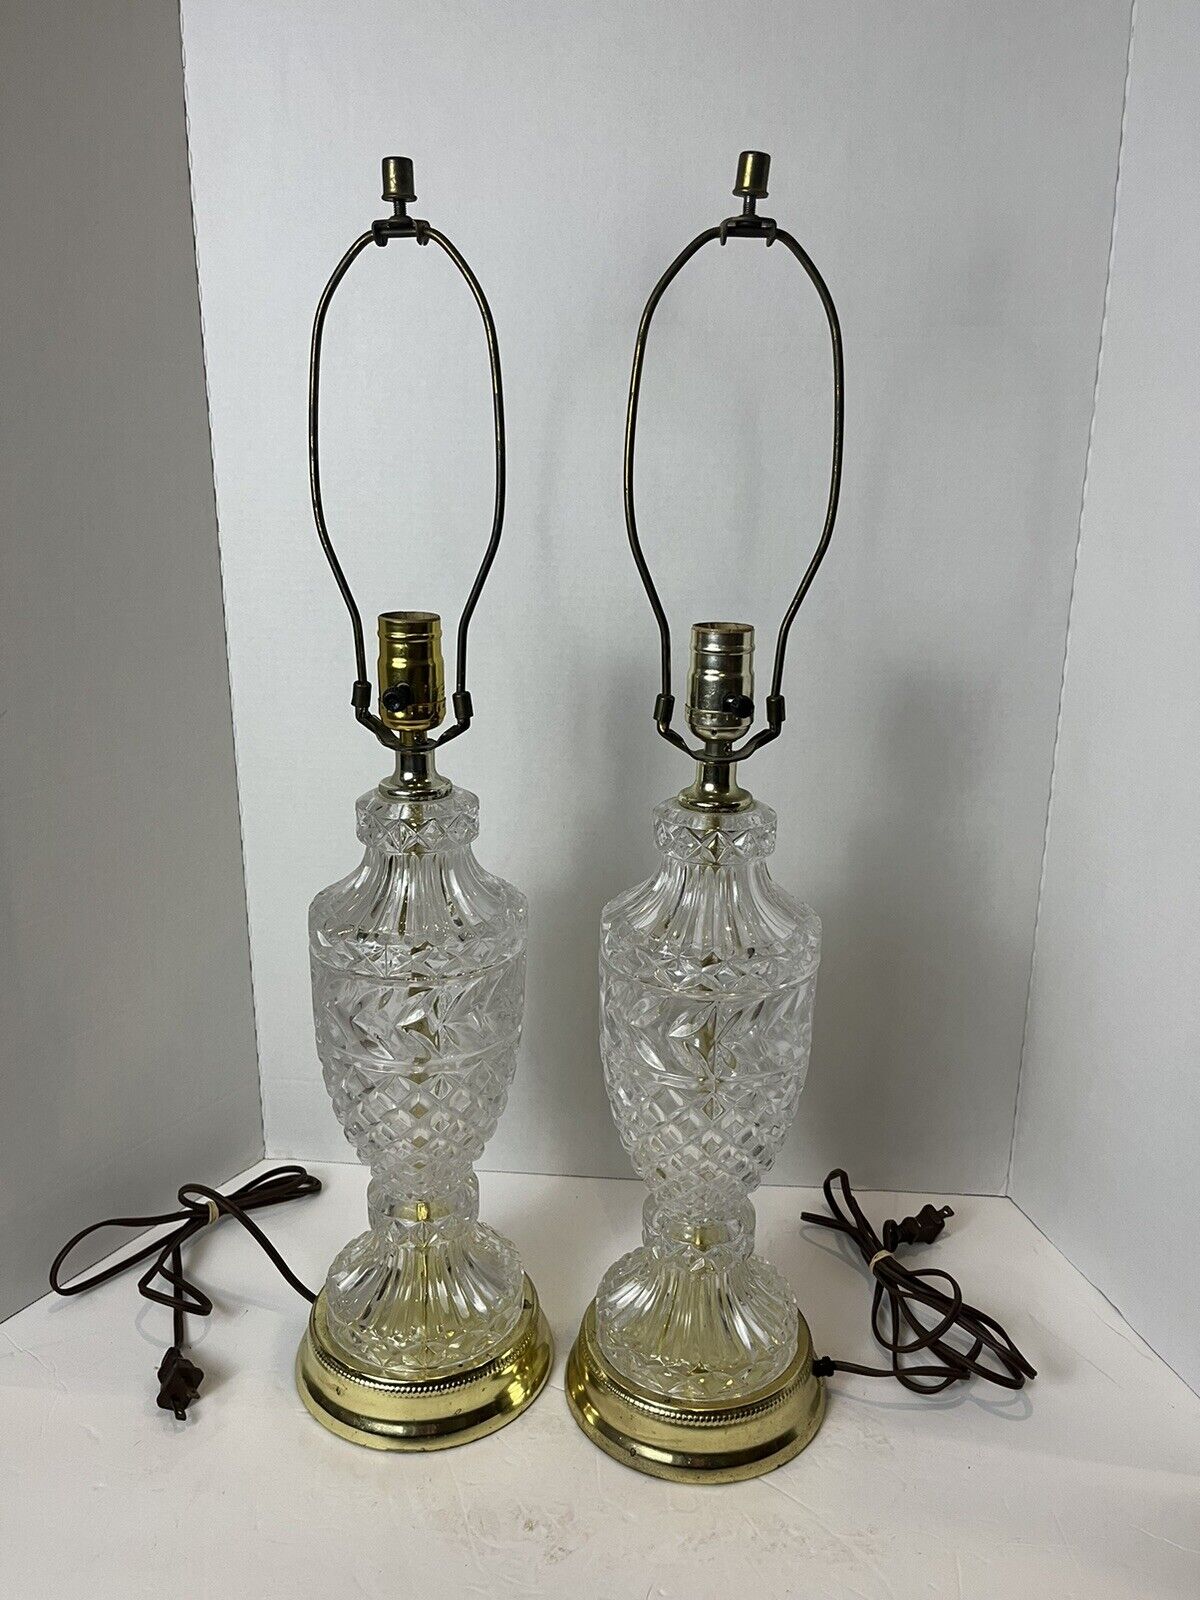 VINTAGE PAIR OF LEAD CRYSTAL TABLE LAMPS WITH BRASS BASE AND TRIM -26” INCHES